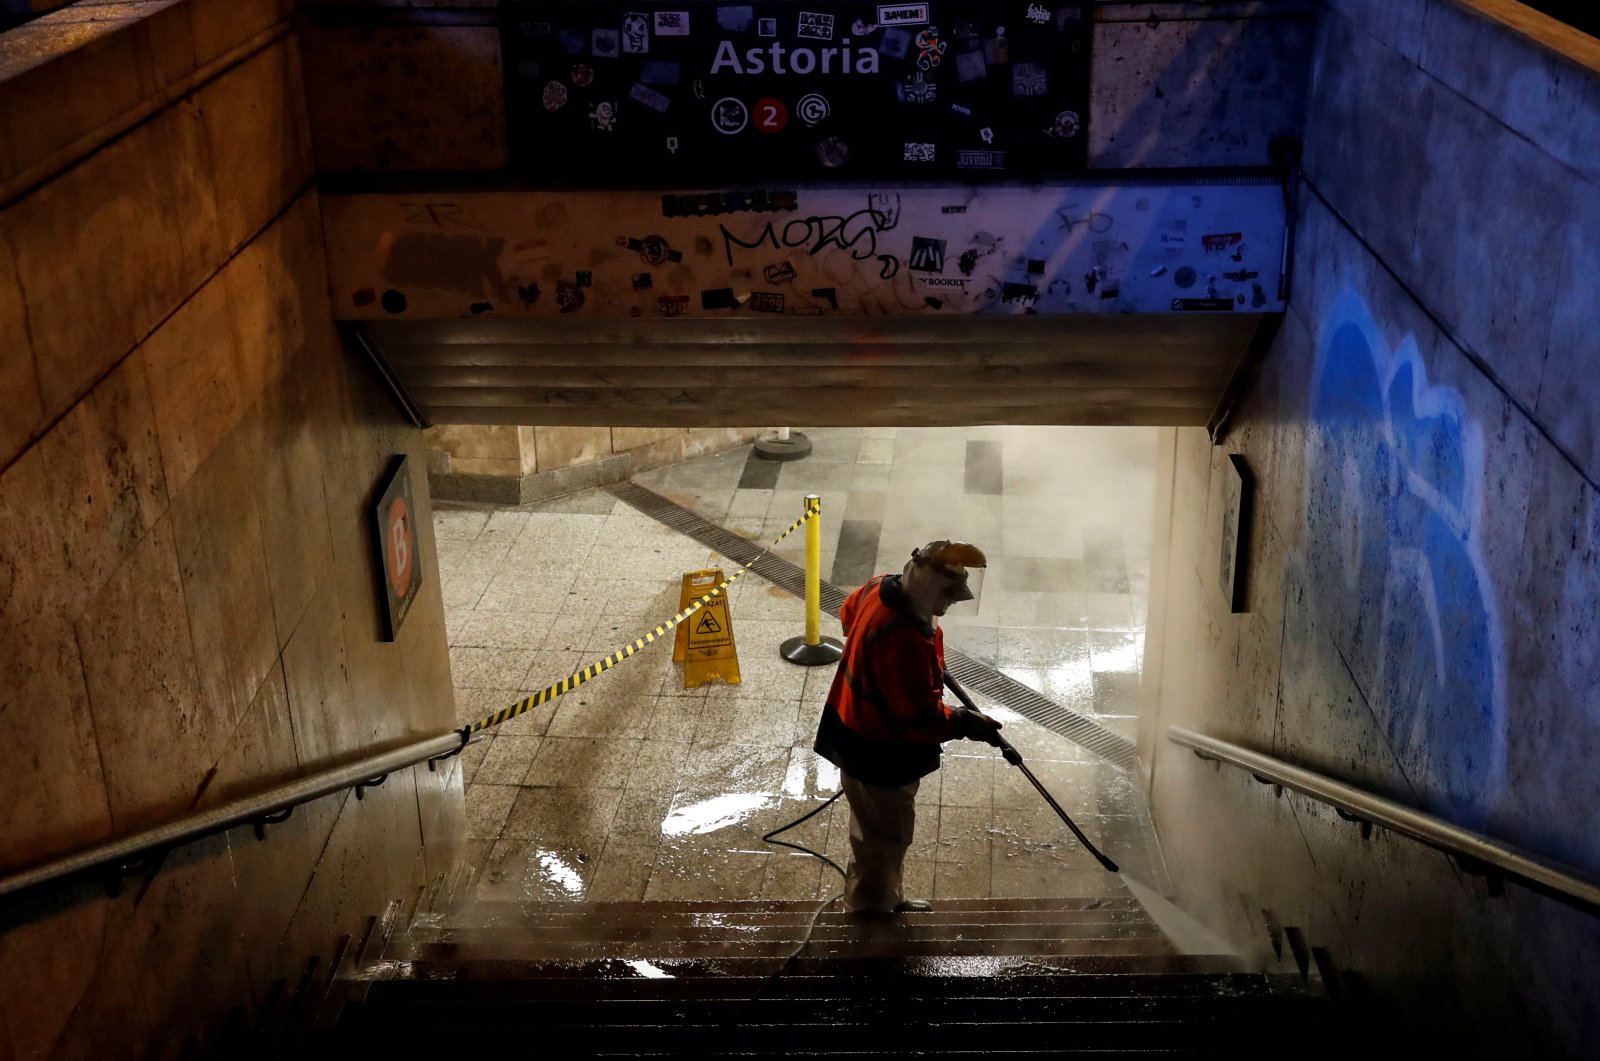 A worker cleans a flight of stairs of an underpass, amid the COVID-19 outbreak, in downtown Budapest, Hungary, Wednesday, March 25, 2020. (Reuters Photo)